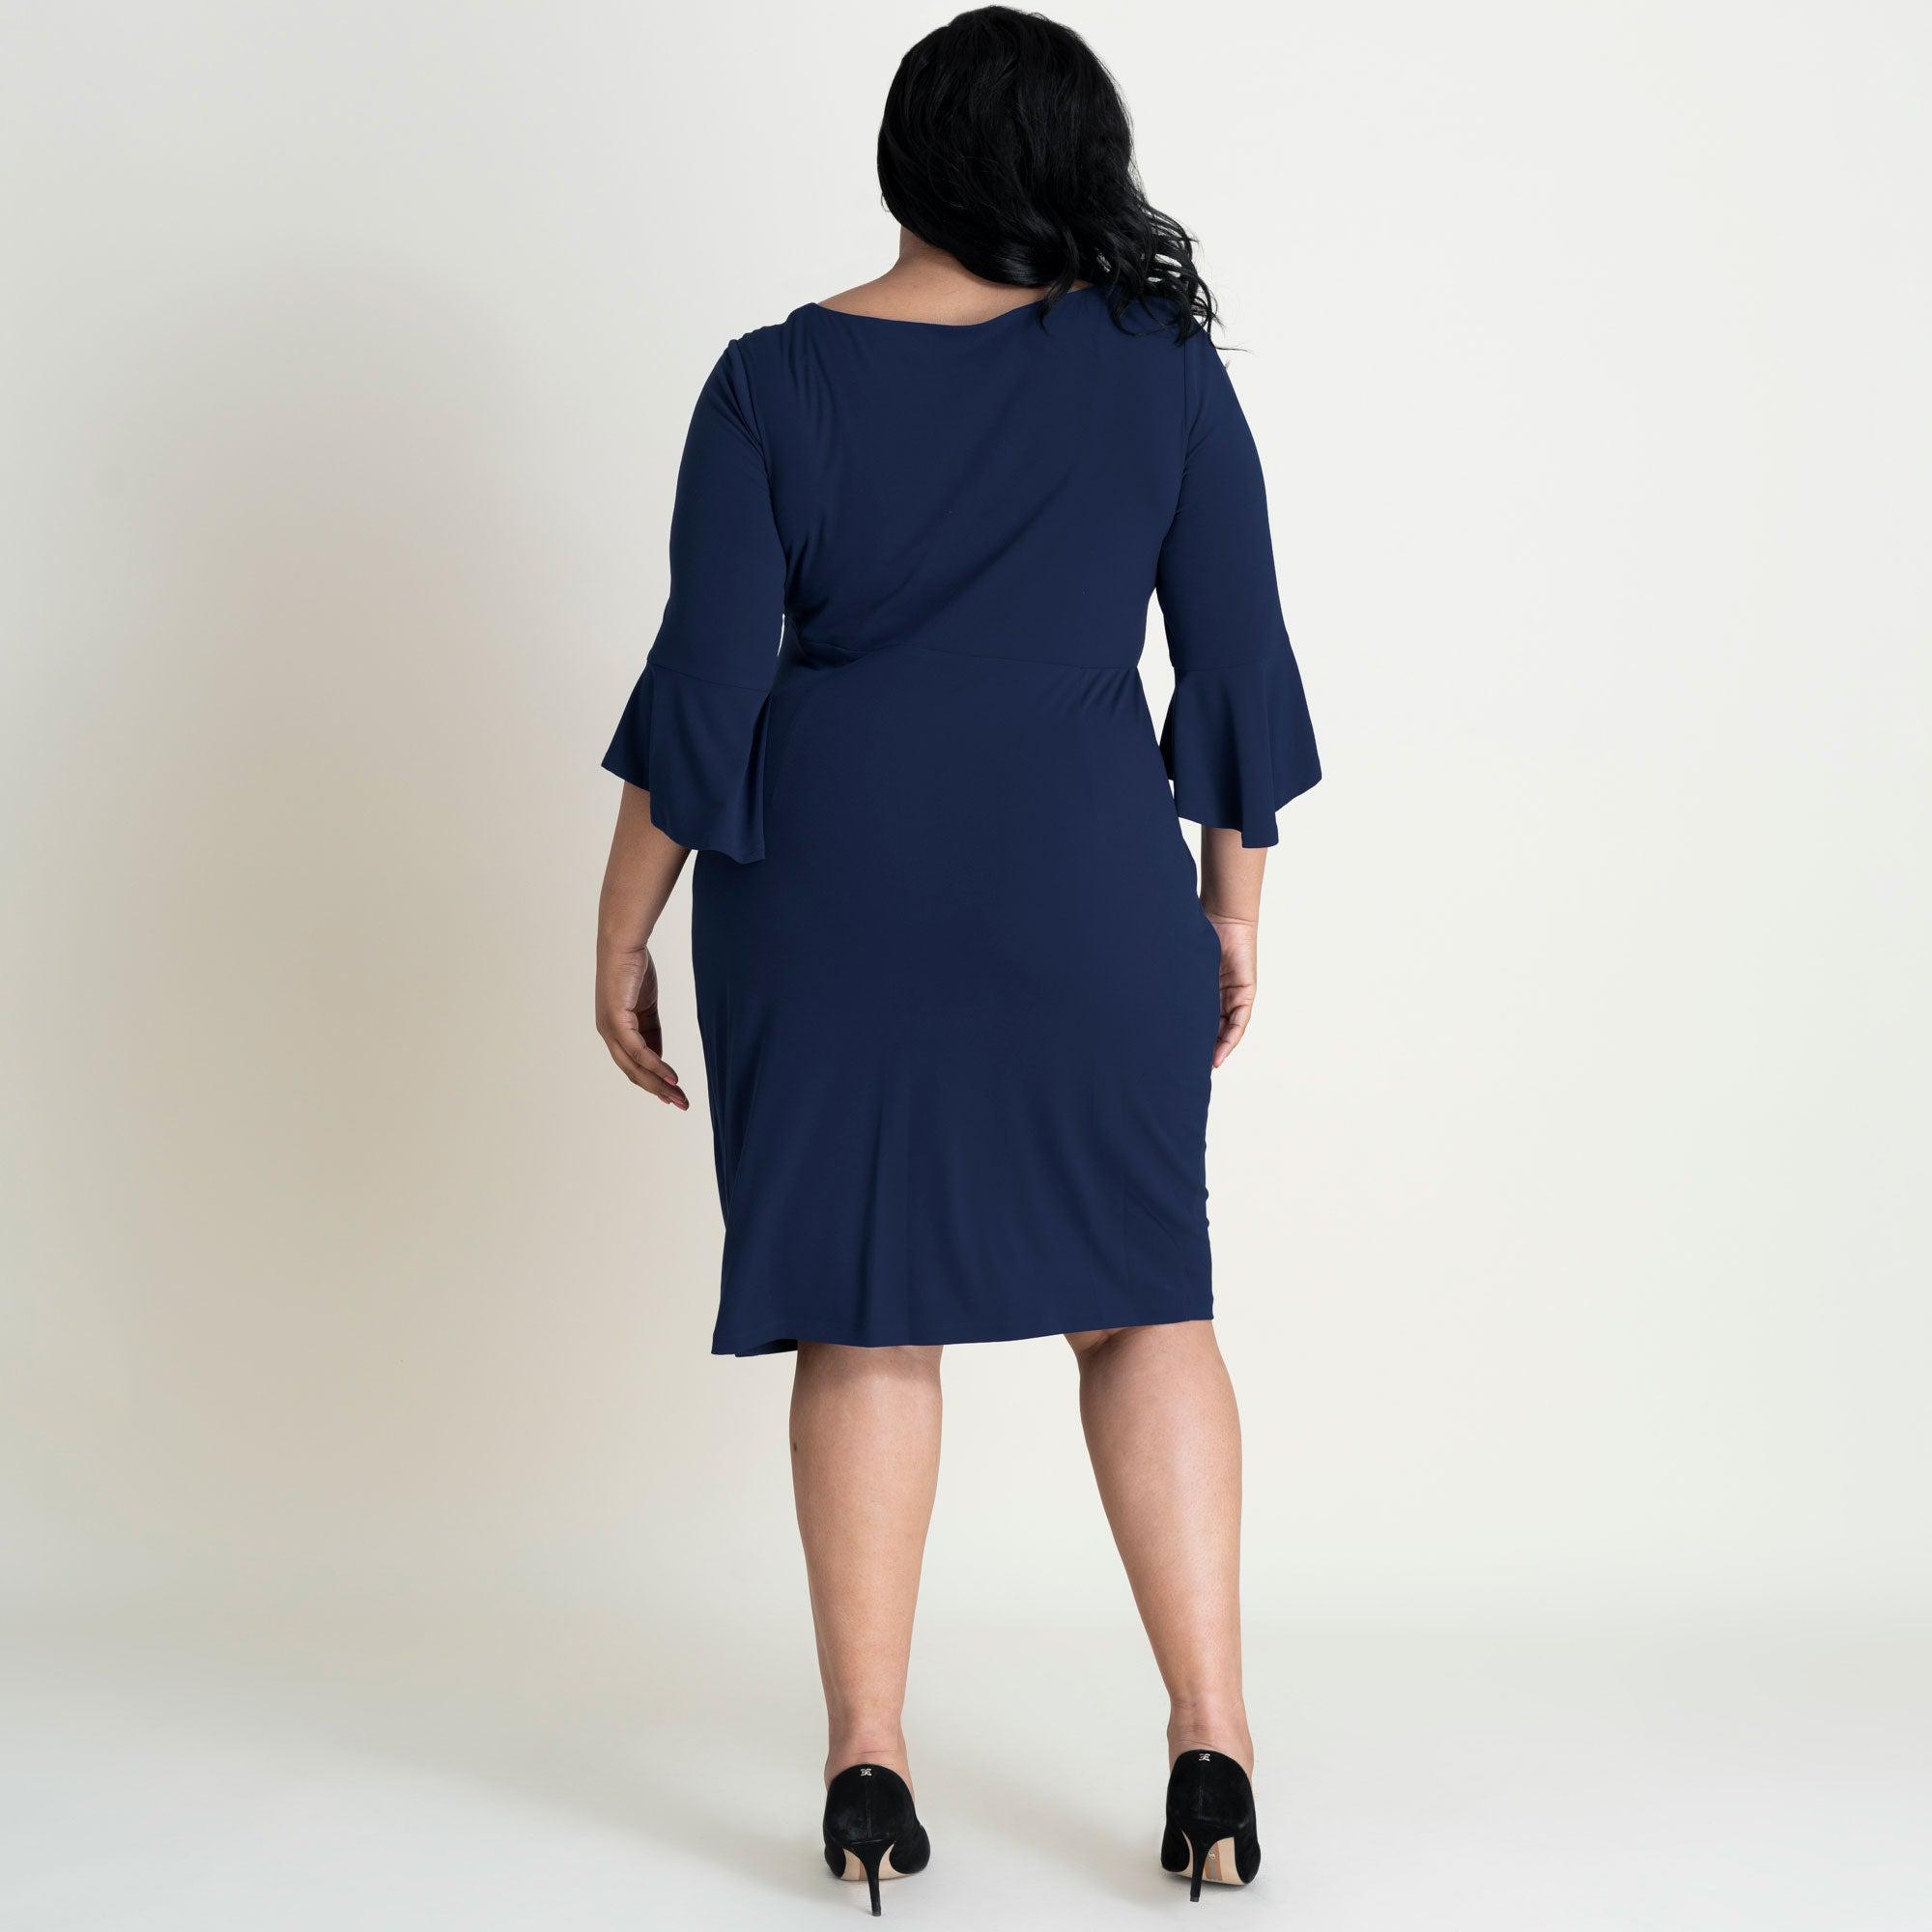 Woman posing wearing Navy Lisa 2.0 Navy Faux Wrap Dress from Connected Apparel